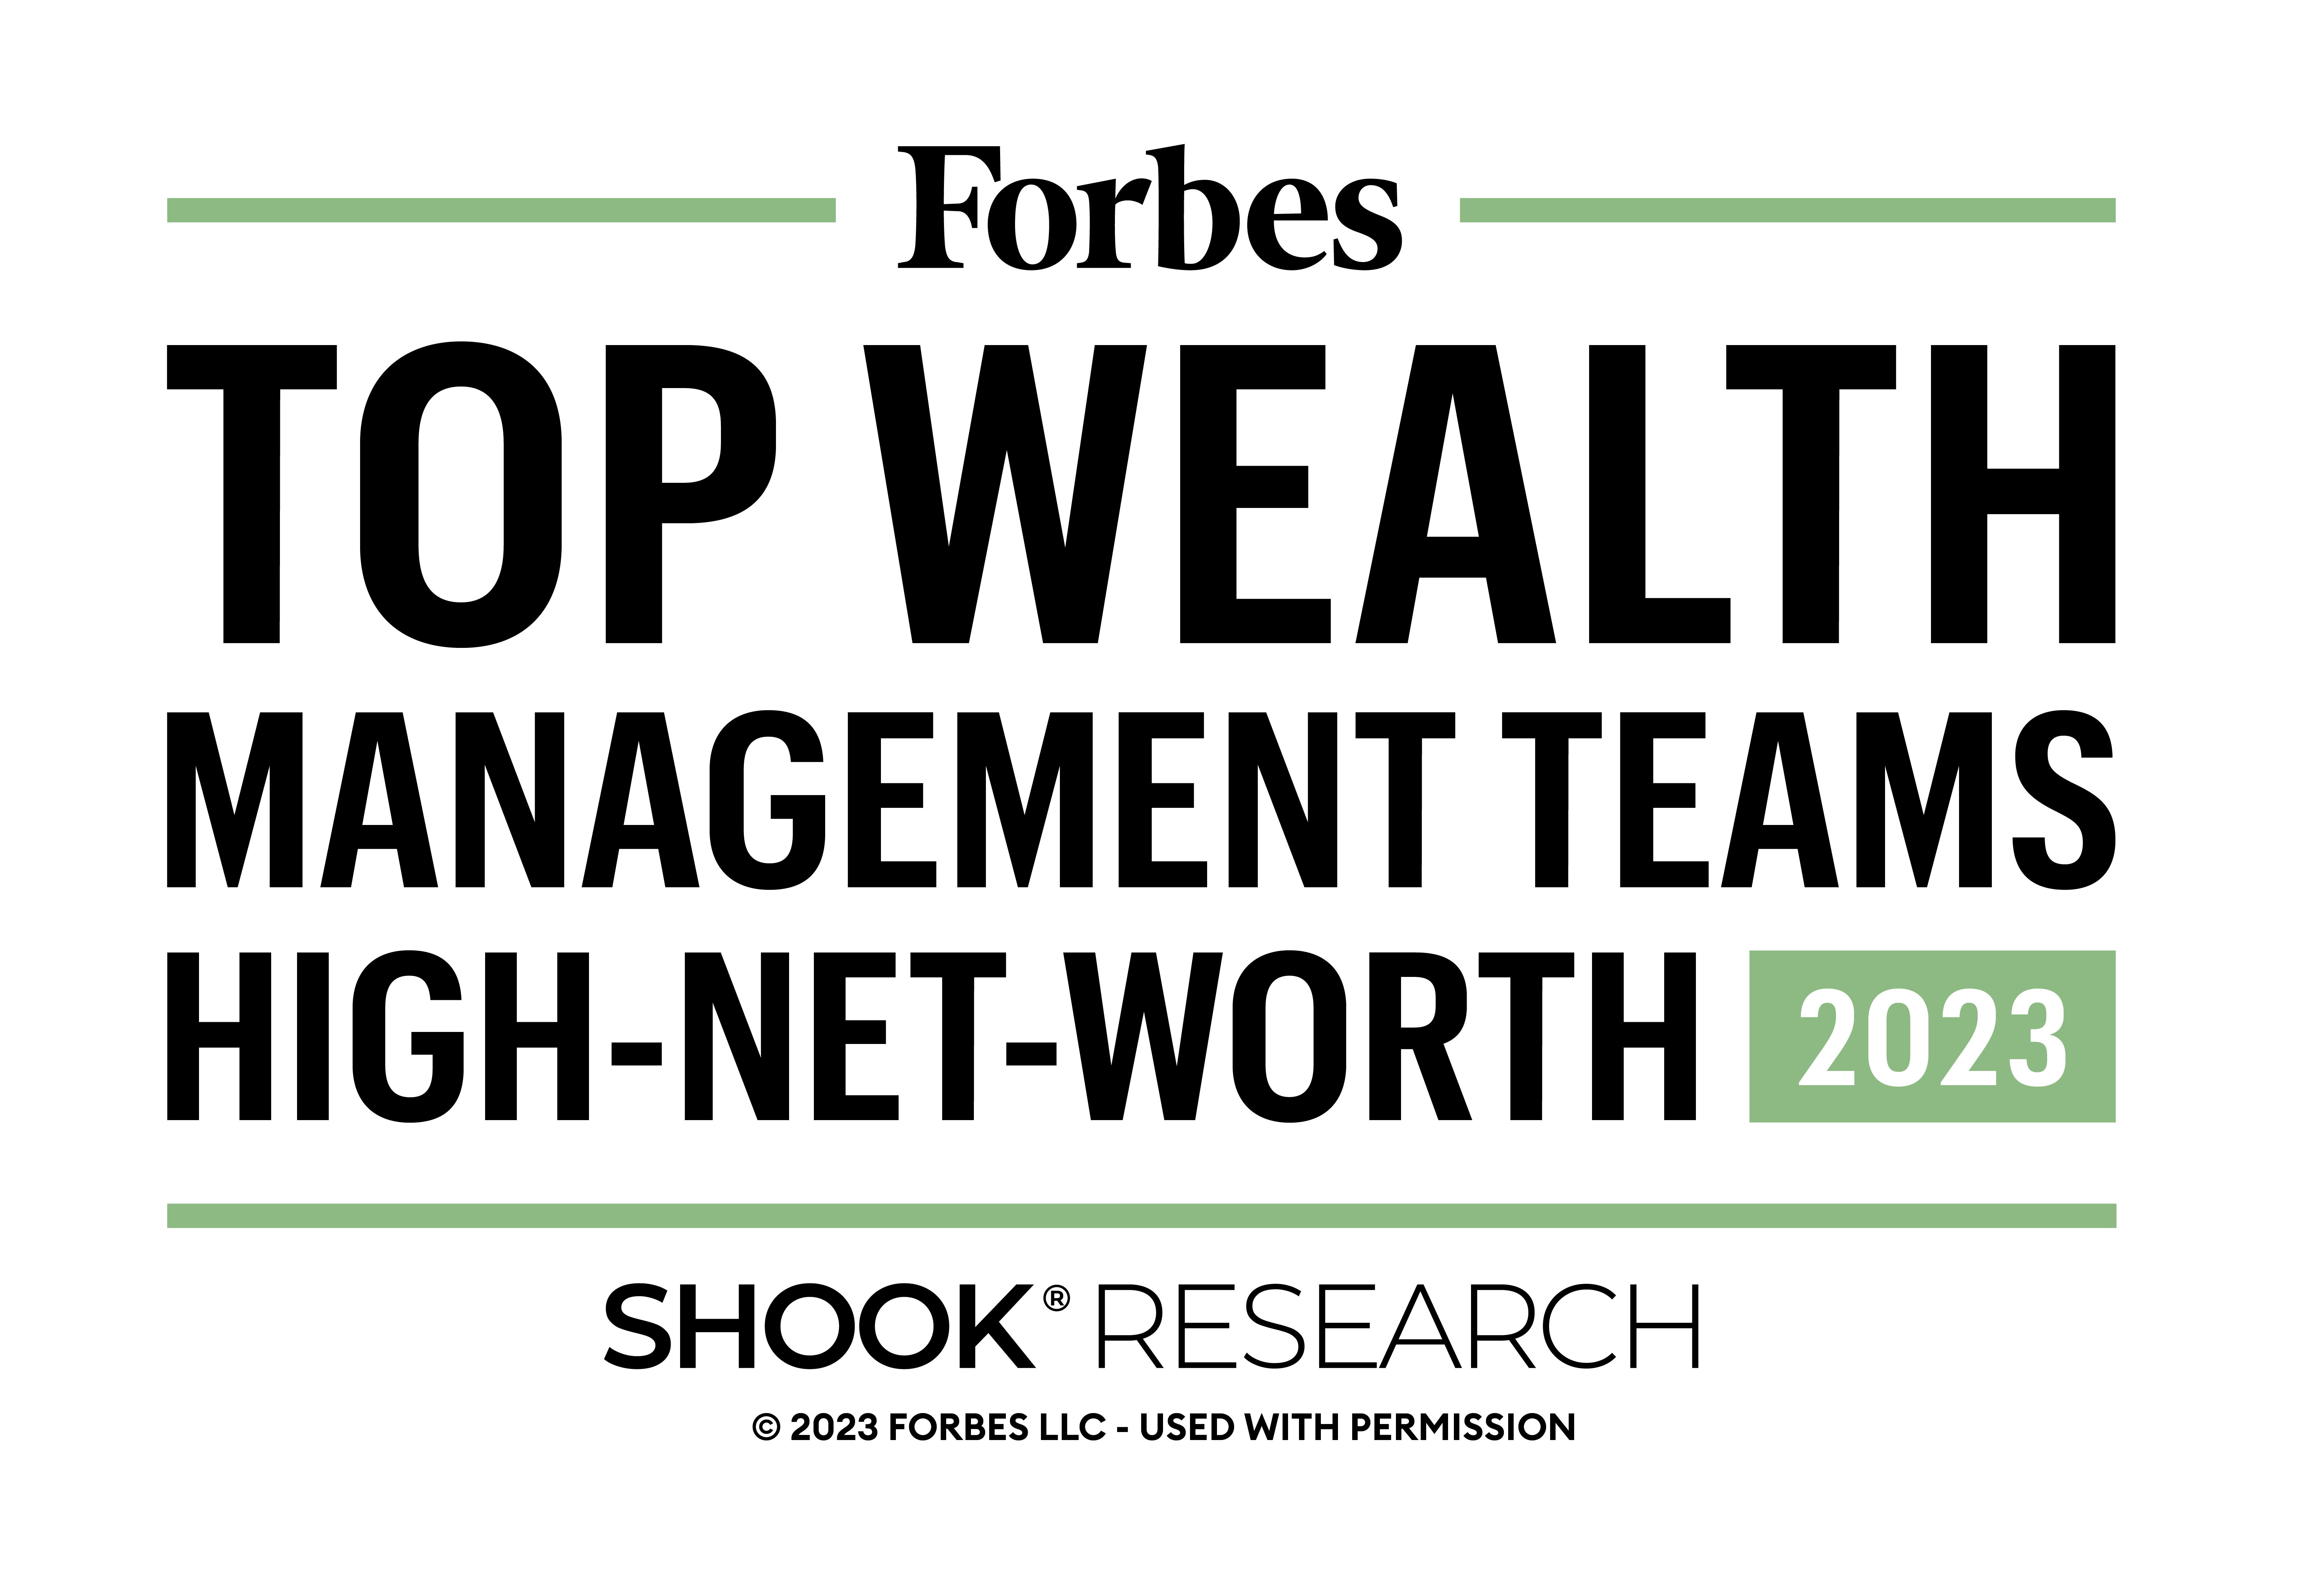 Named on the Forbes AMERICA'S TOP WEALTH MANAGEMENT TEAMS HIGH NET WORTH list